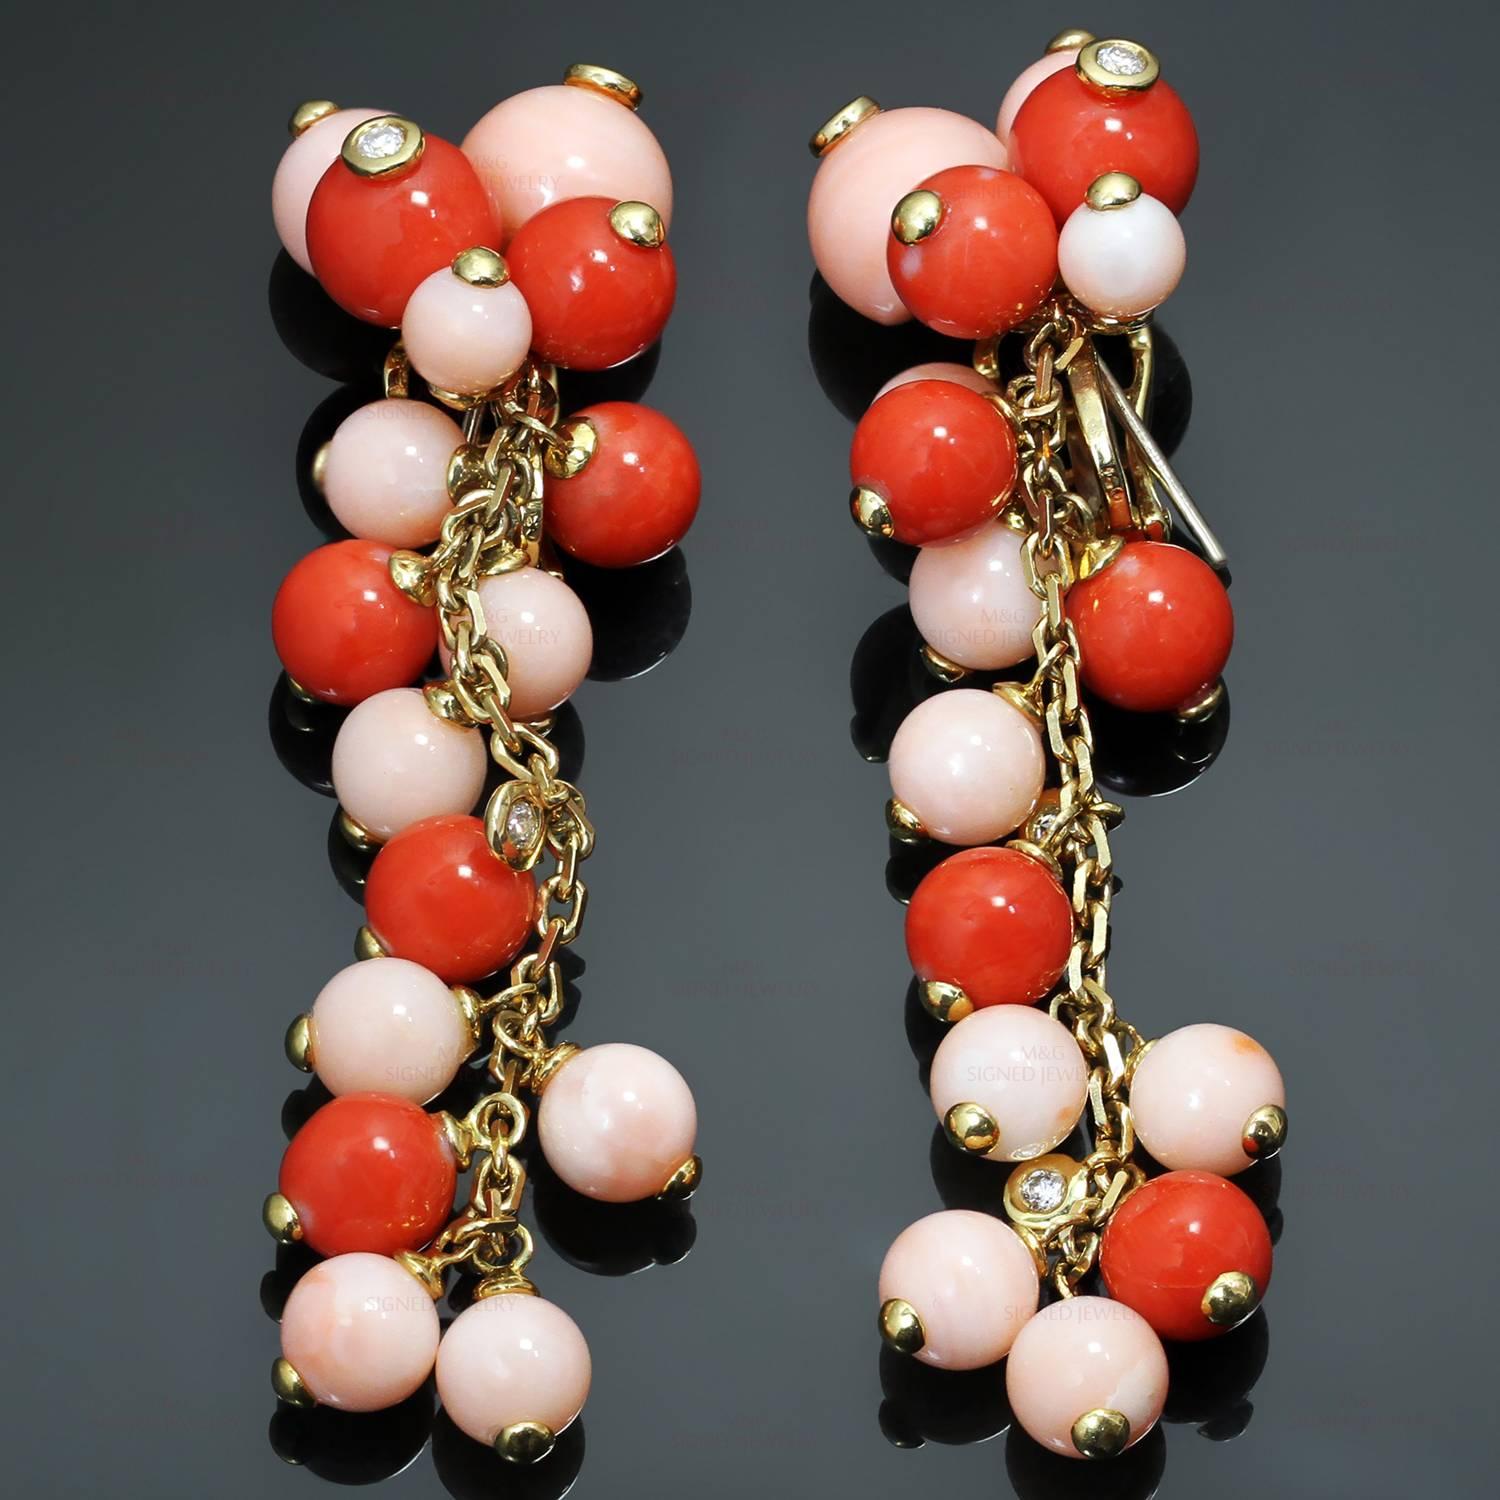 These beautiful earrings feature pinkish and reddish coral beads ranging in size from 5.30mm to 9.40mm, accented with full-cut diamonds of an estimated 0.28 carats, and set in 18k yellow gold. These earrings are designed for both pierced and